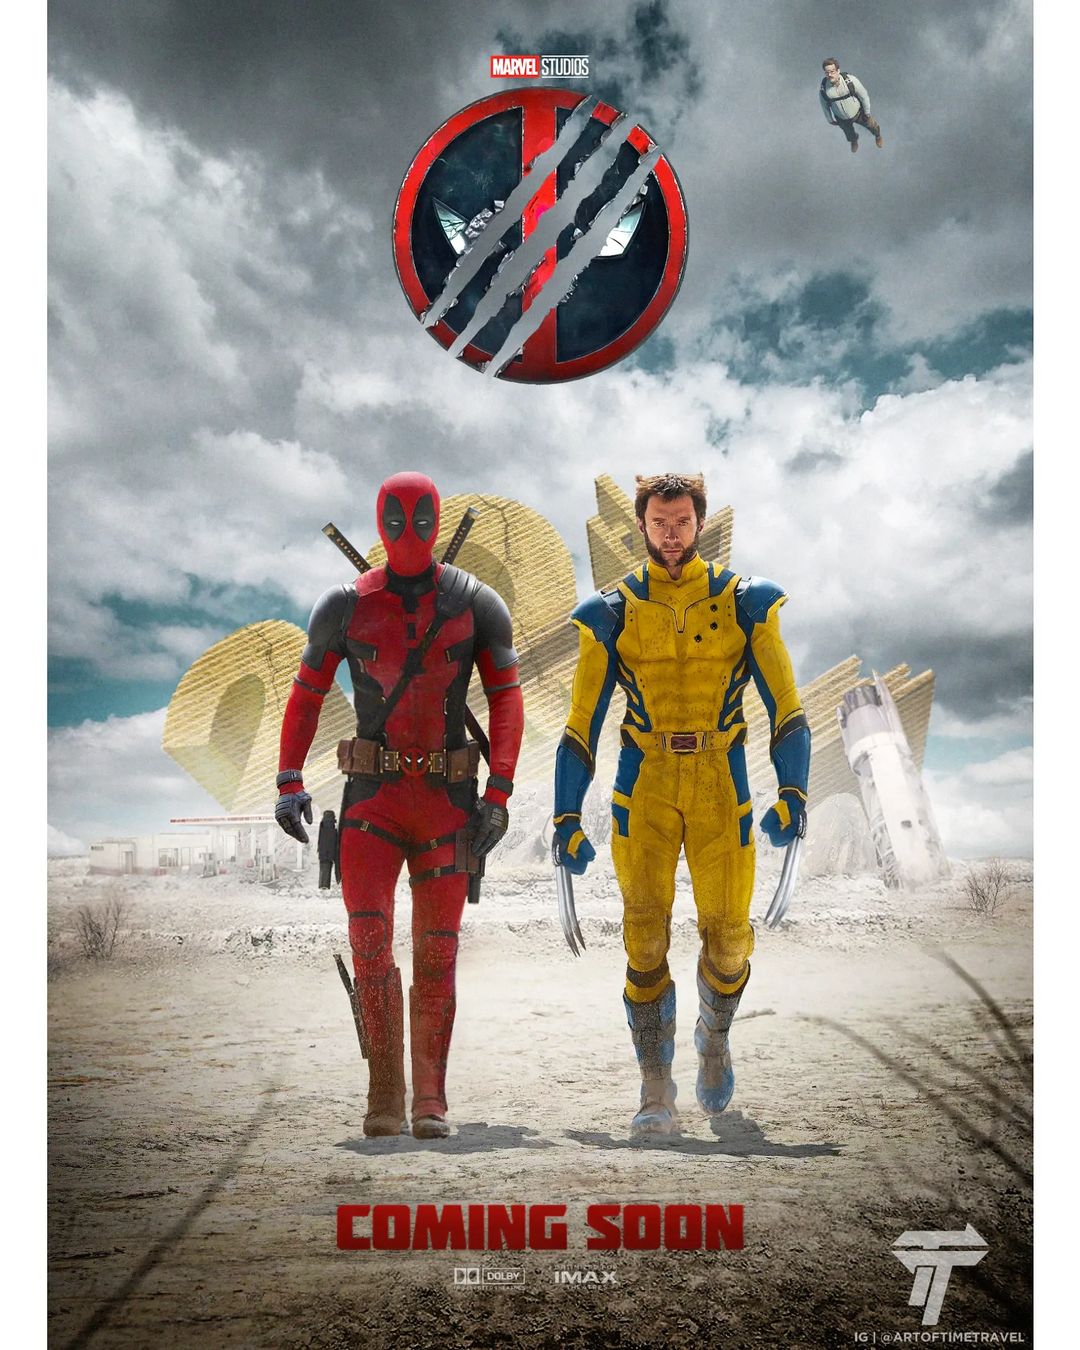 Deadpool 3 poster quick edit made by me : r/marvelstudios